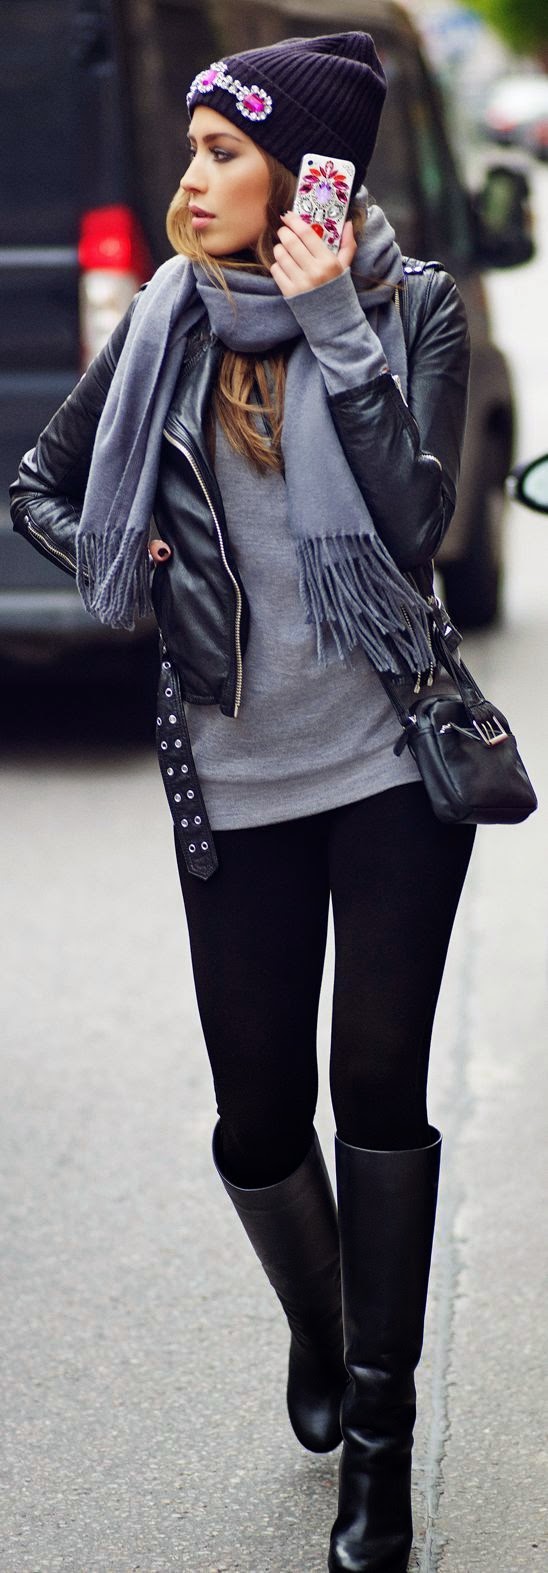 Street fashion Edgy styling Just a Pretty Style